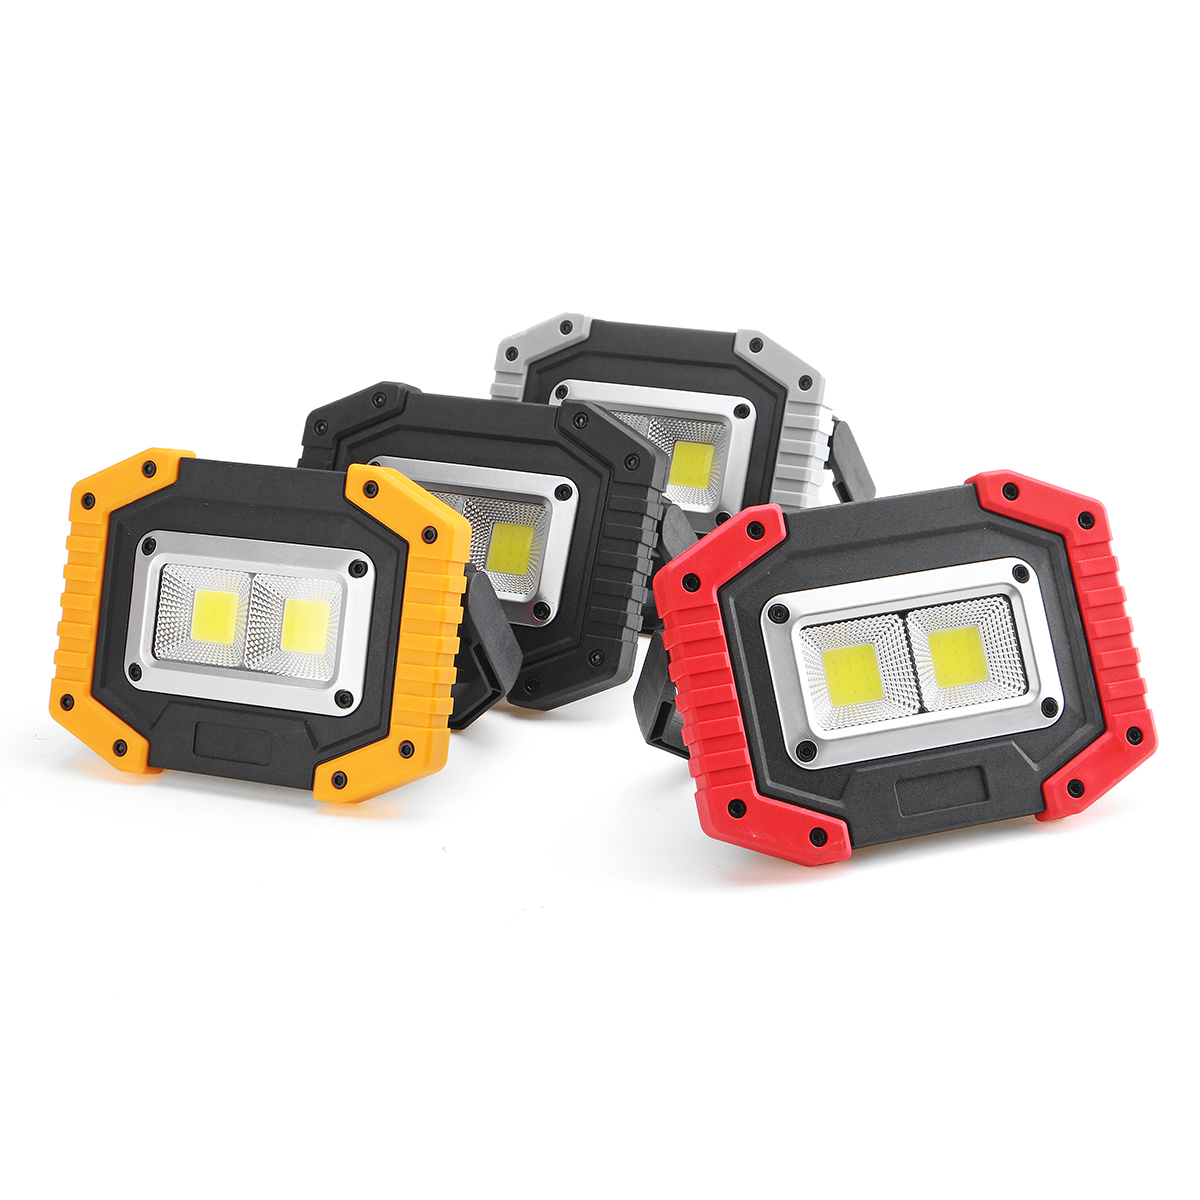 

XANES® 24C 30W C0B LED Work Light Waterproof Rechargeable LED Floodlight for Outdoor Camping Hiking Fishing Emergency Car Repairing